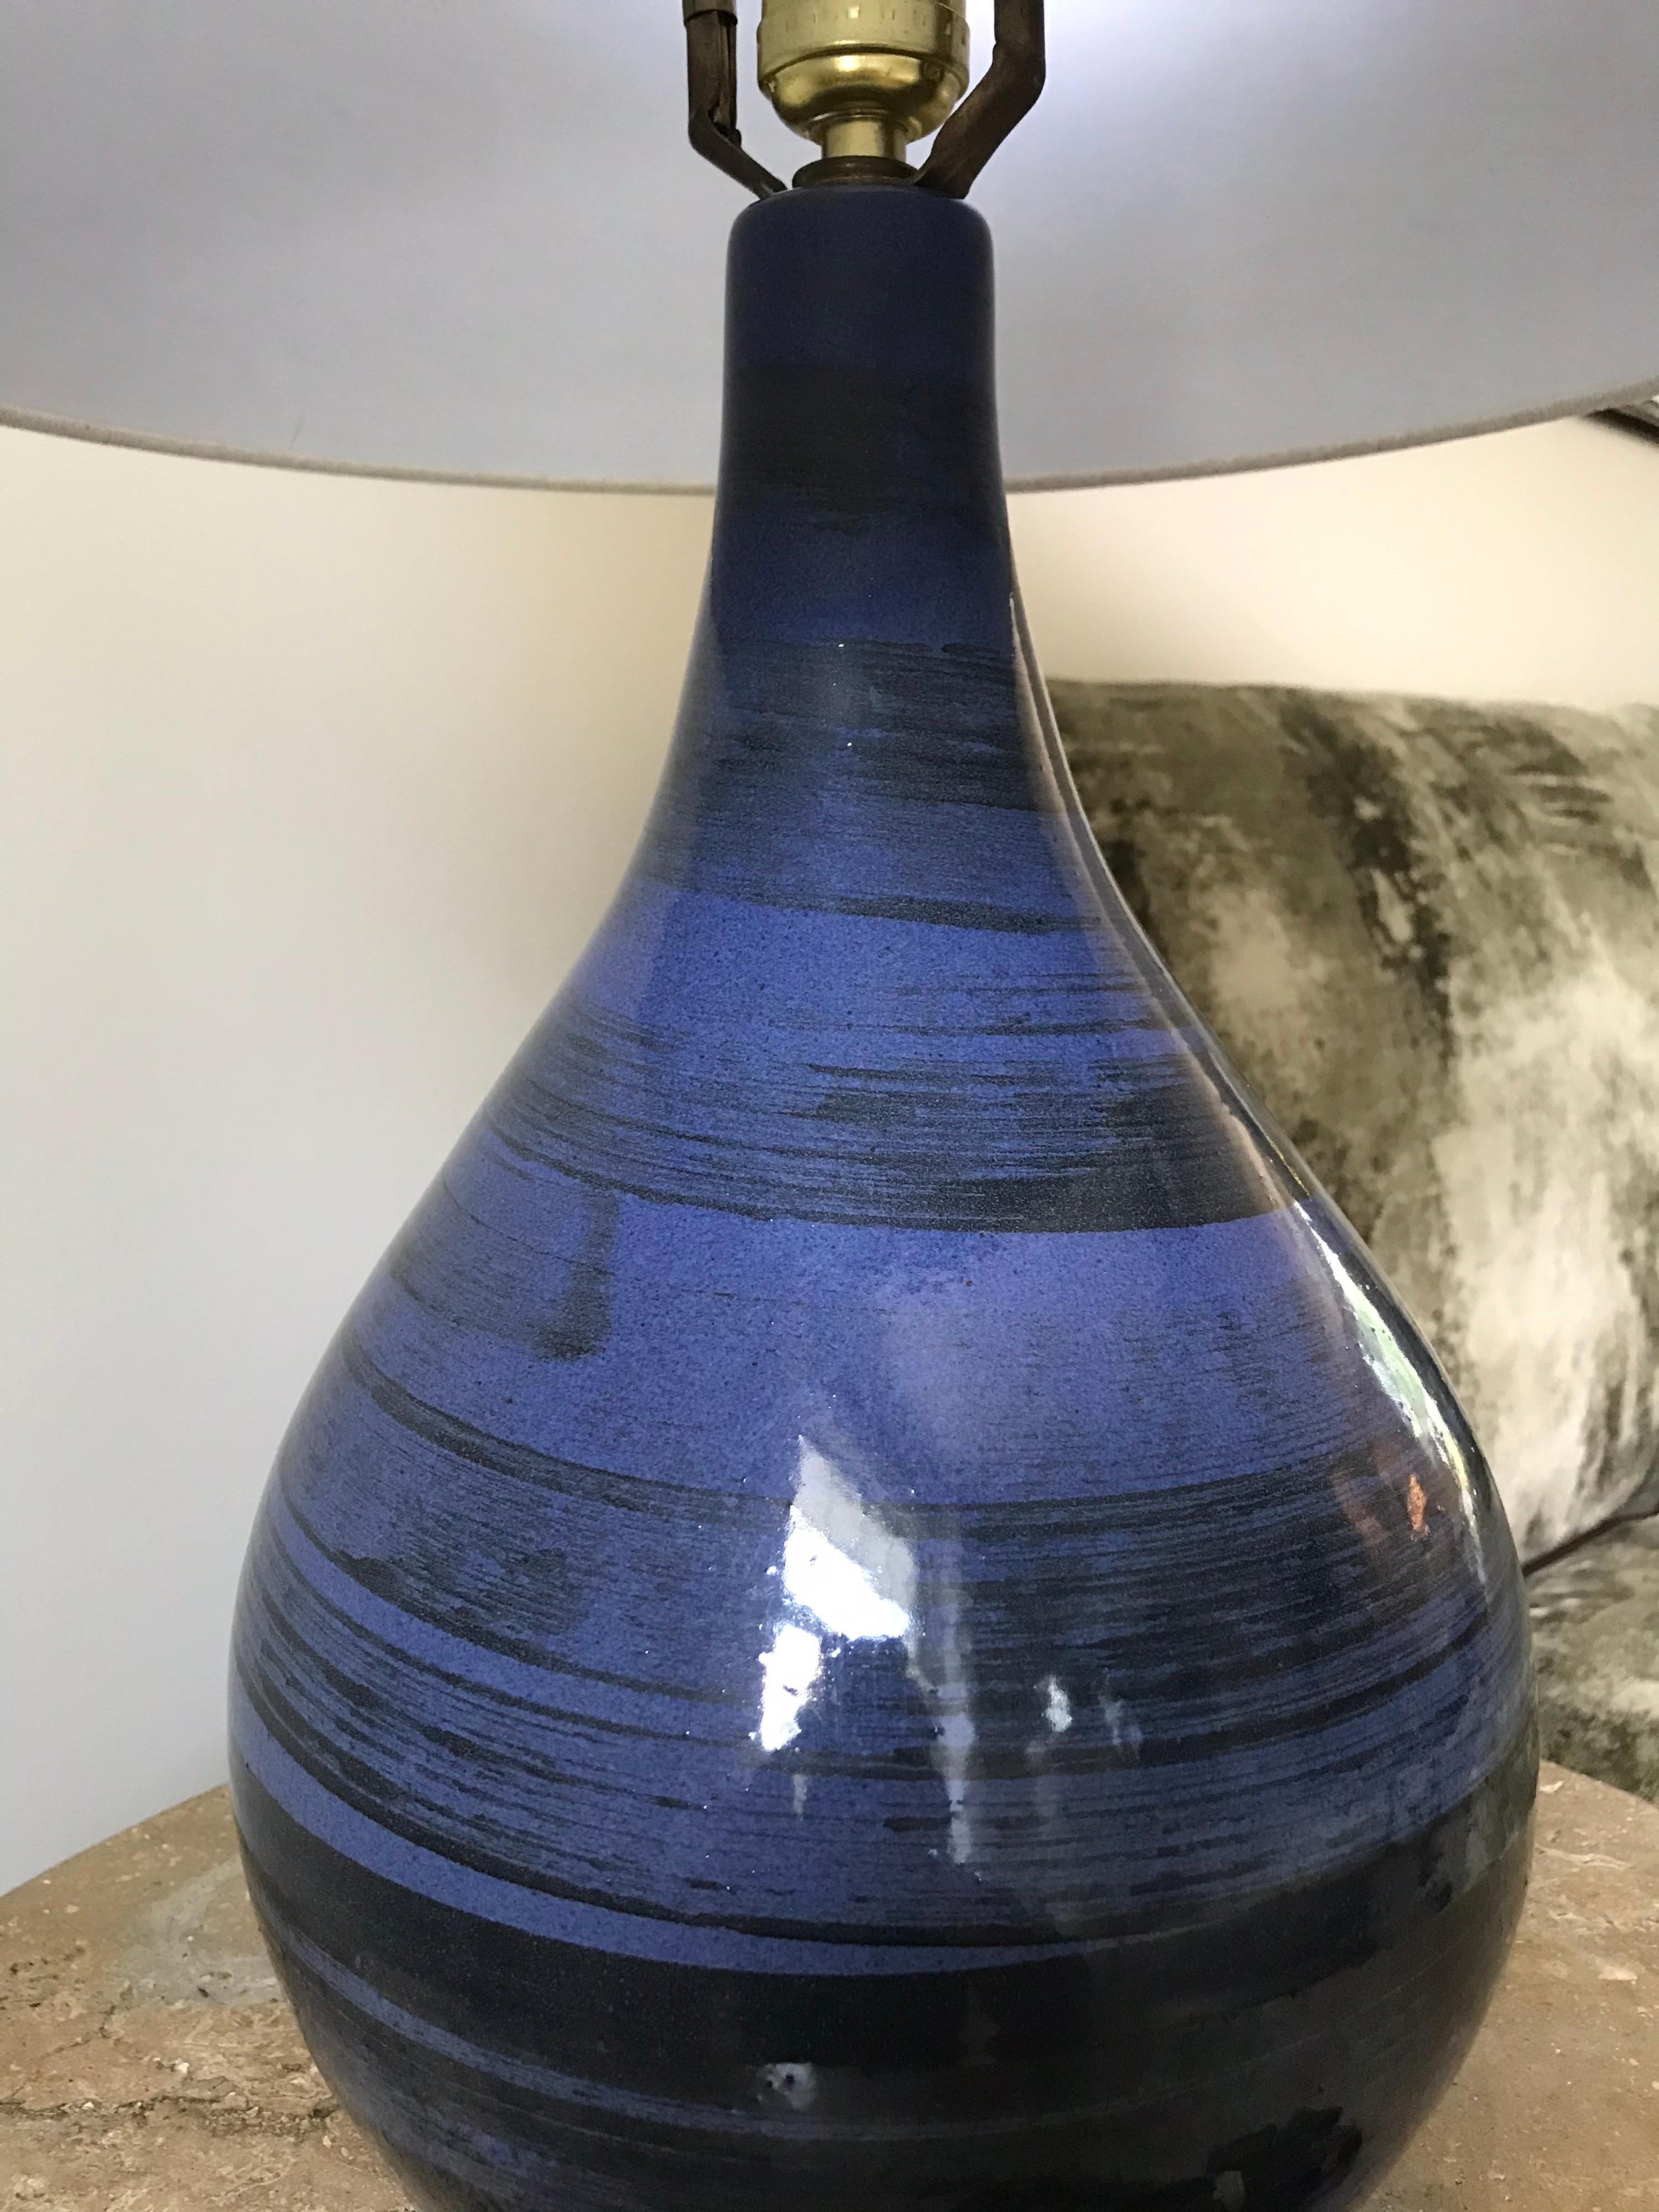 Iconic teardrop table lamp by ceramicist duo Jane and Gordon Martz for Marshall Studios. Beautiful form coupled with a classic Royal blue and black swirled design.

New harp, new shade, new finial. Wiring appears to have been updated at some